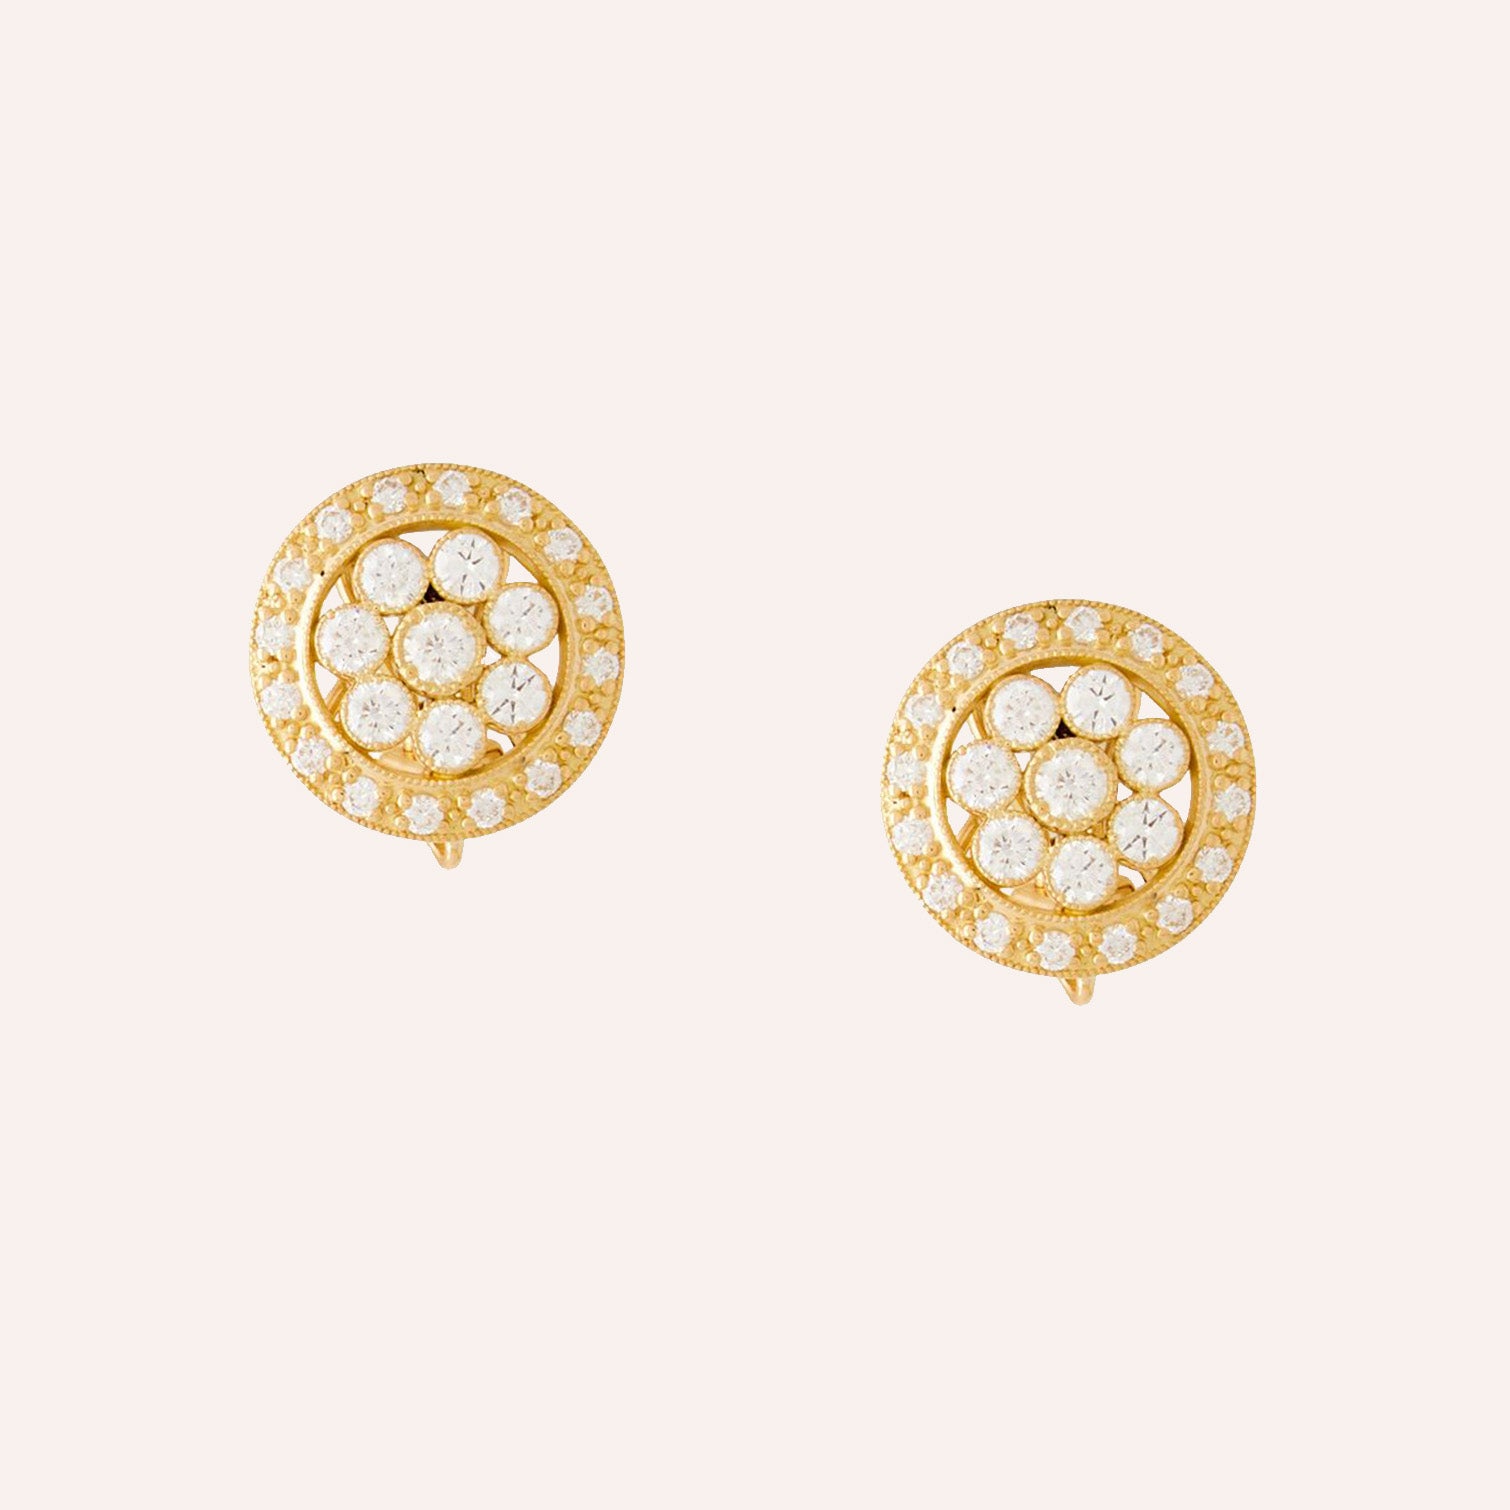 18K Yellow Gold Large Blossom Earrings